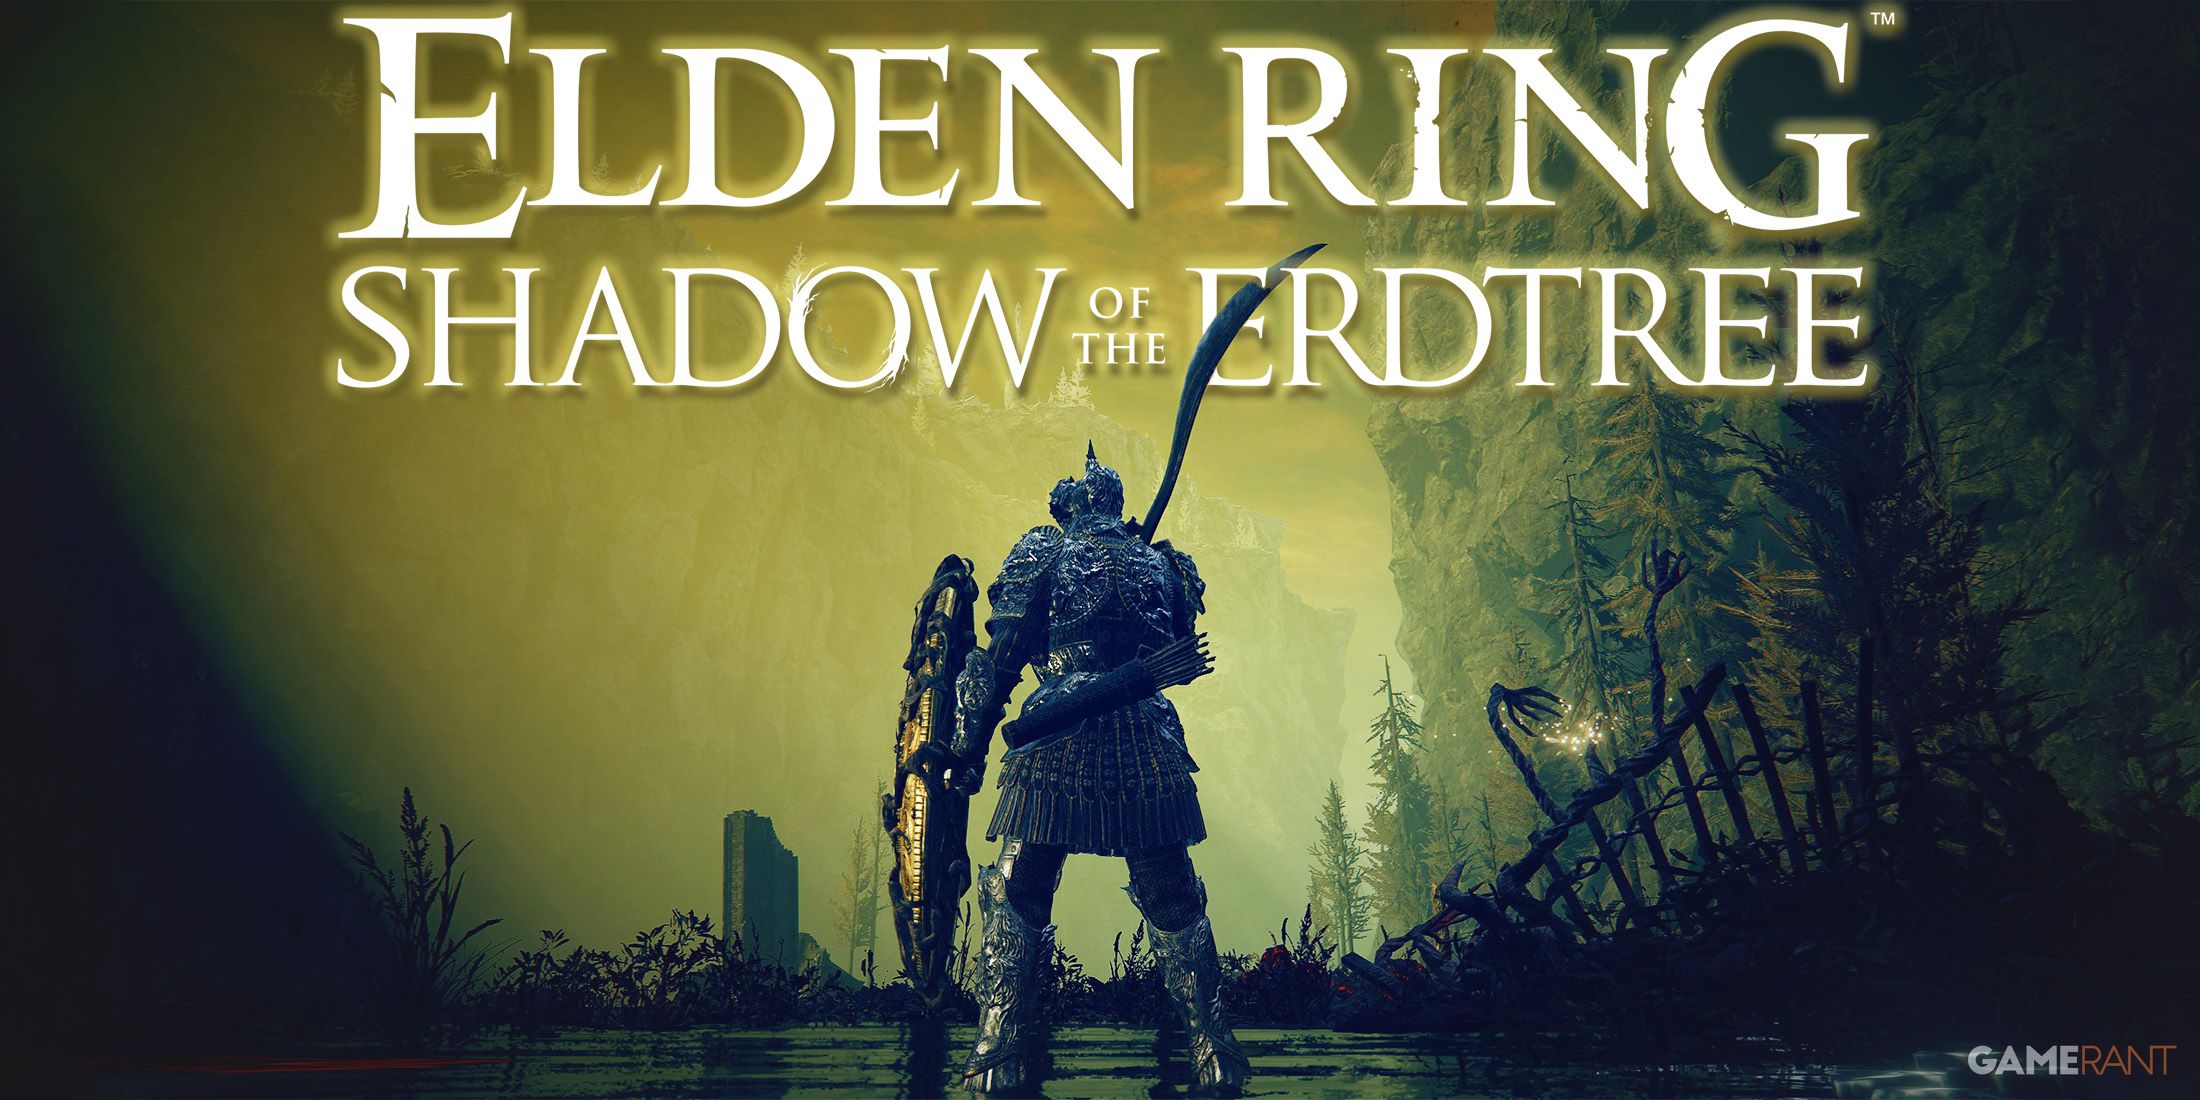 Elden Ring Shadow of the Erdtree Unte Ruins valley with game logo